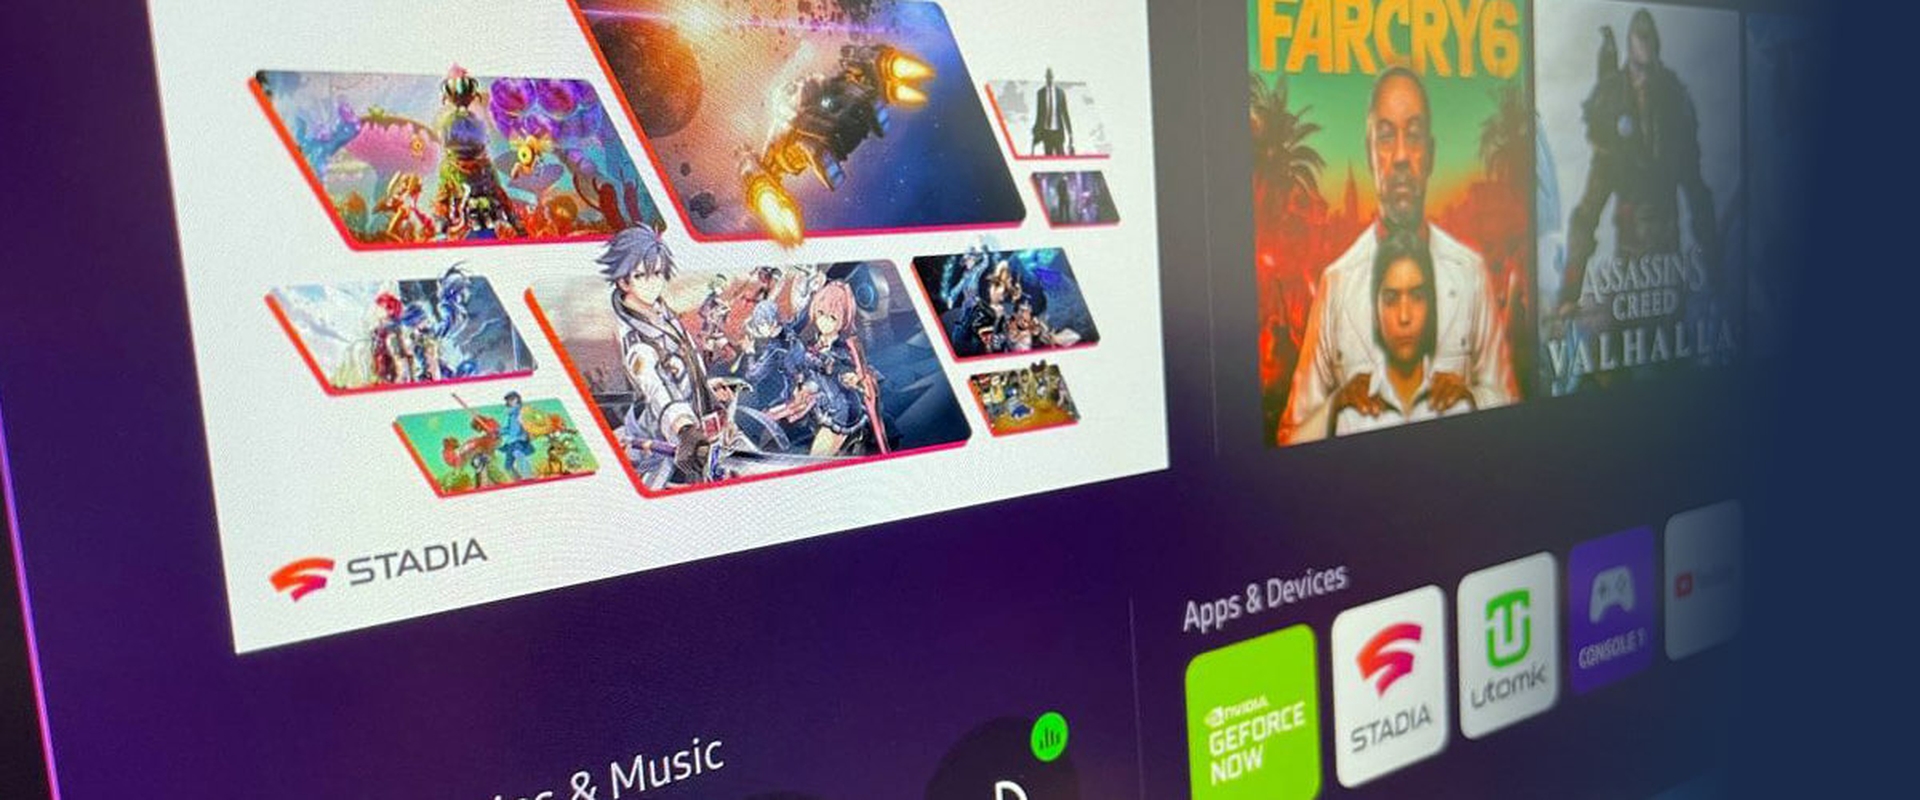 Samsung Gaming Hub is almost here, and it will feature Xbox Cloud Gaming as a way to enjoy games without a console on 2022 Samsung Smart TVs.